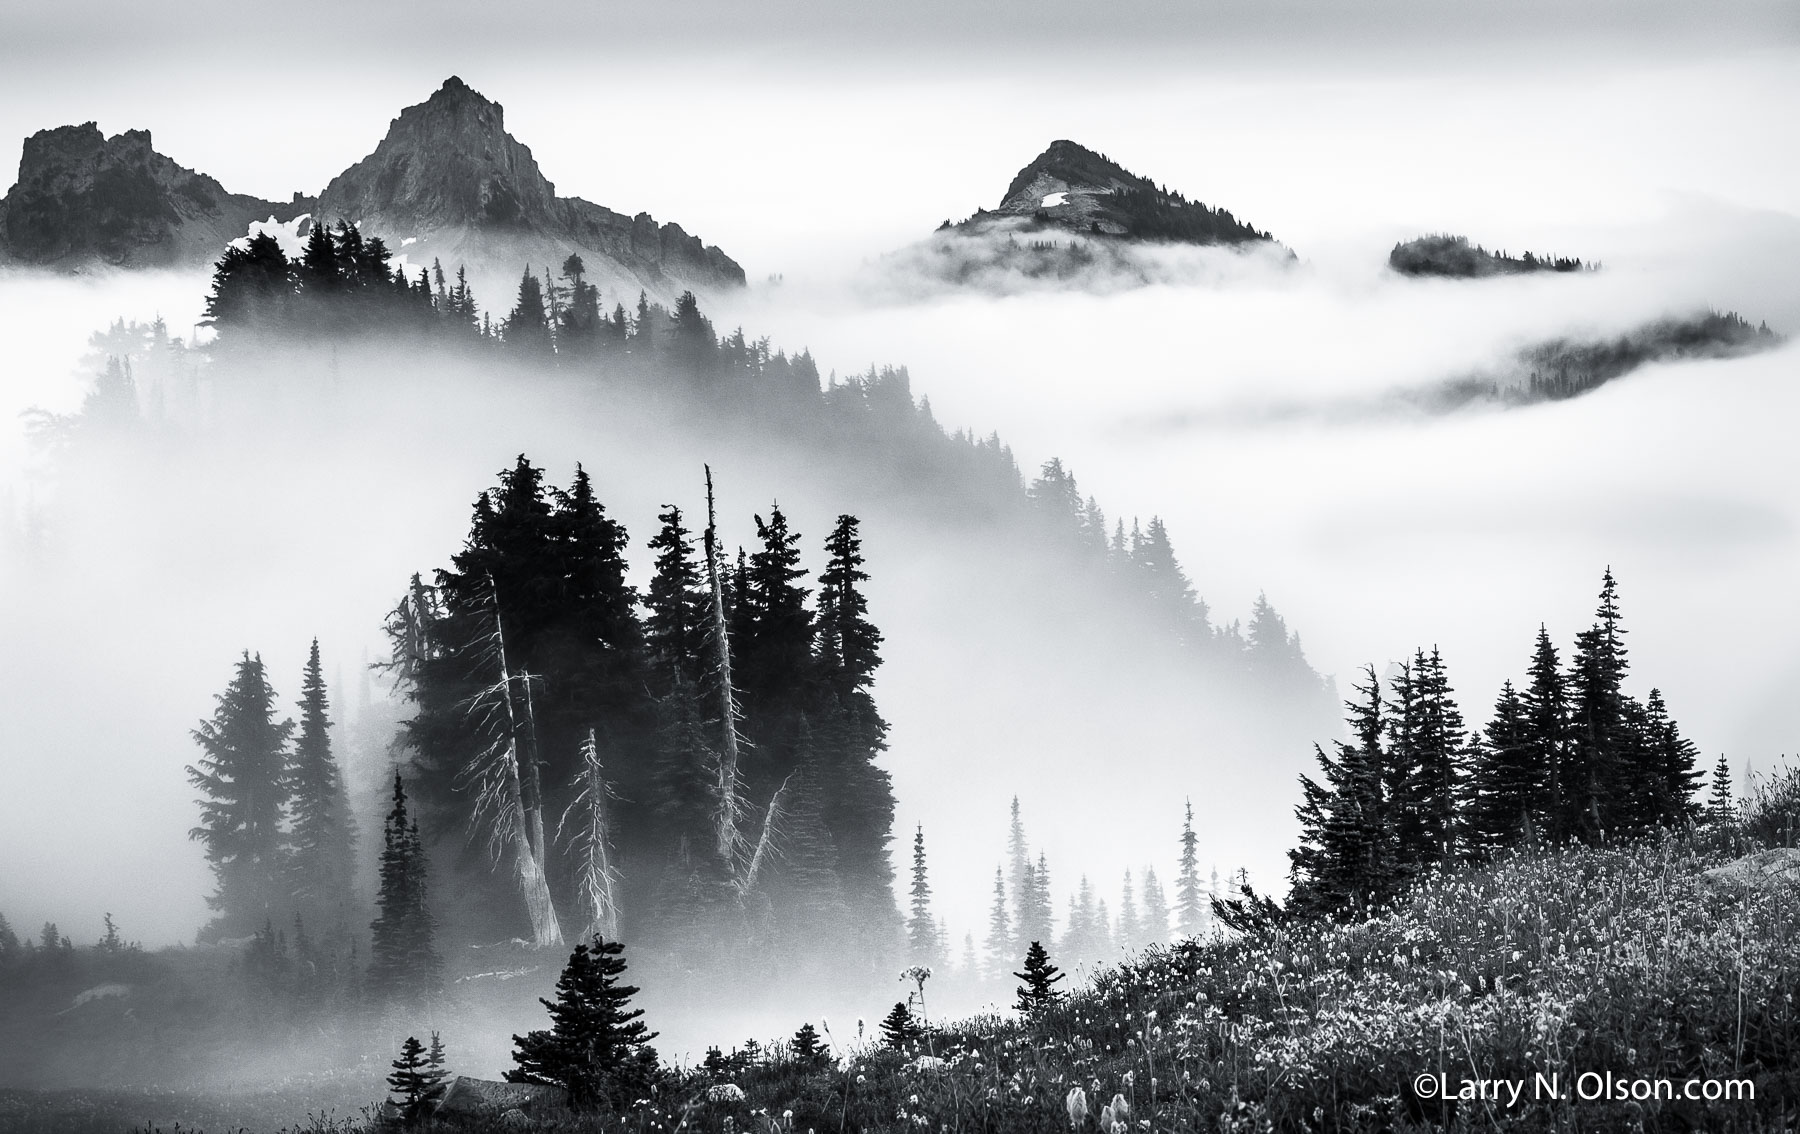 Tatoosh Range, Mt. Rainier National Park, WA | High peaks and ridges are silhouetted in layers of clouds and fog.